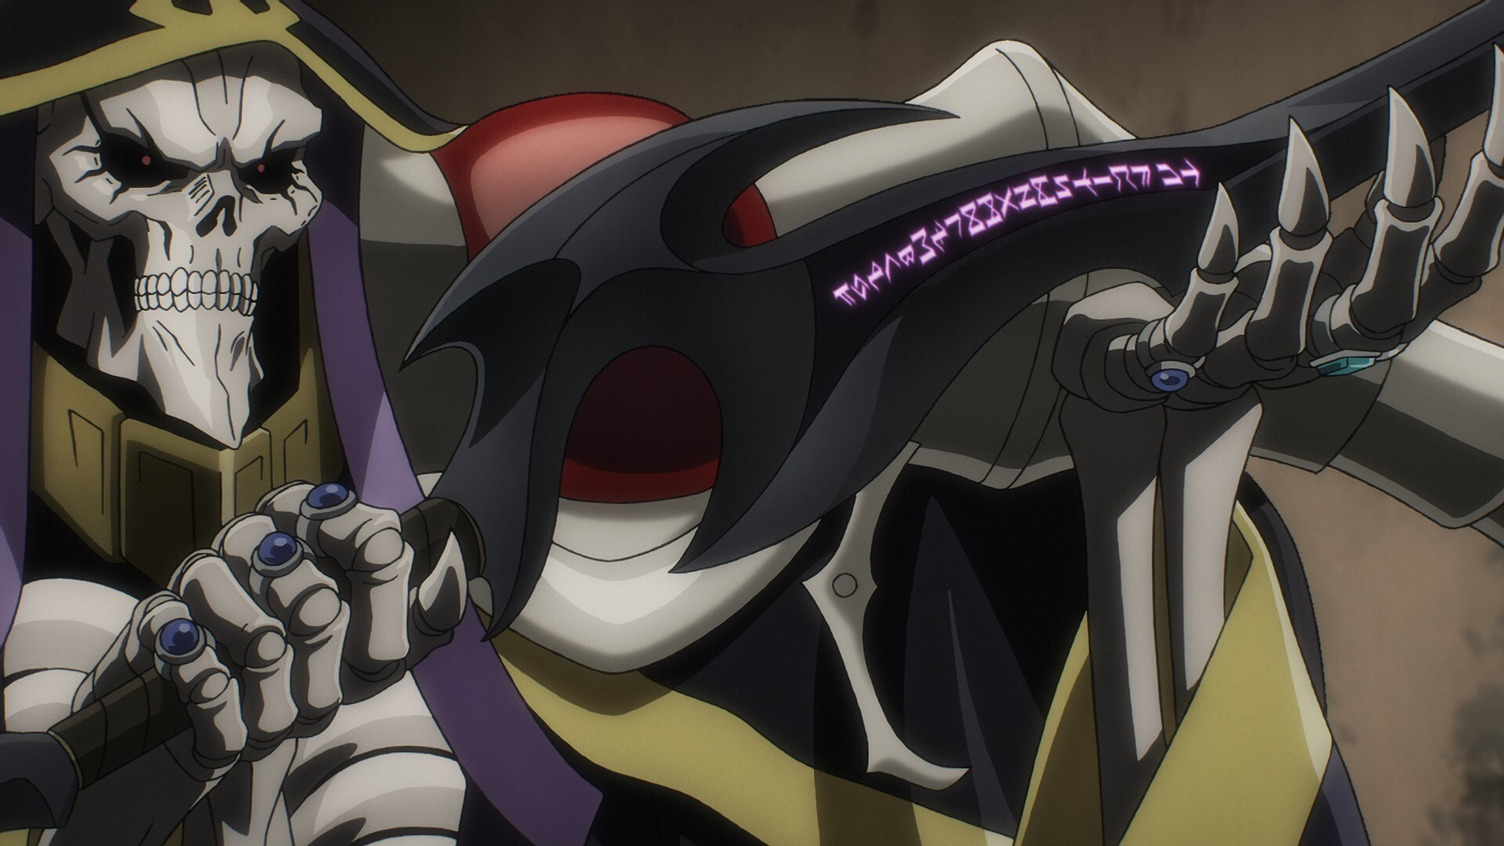 Crunchyroll - QUIZ: How Much Do You Know About Overlord?